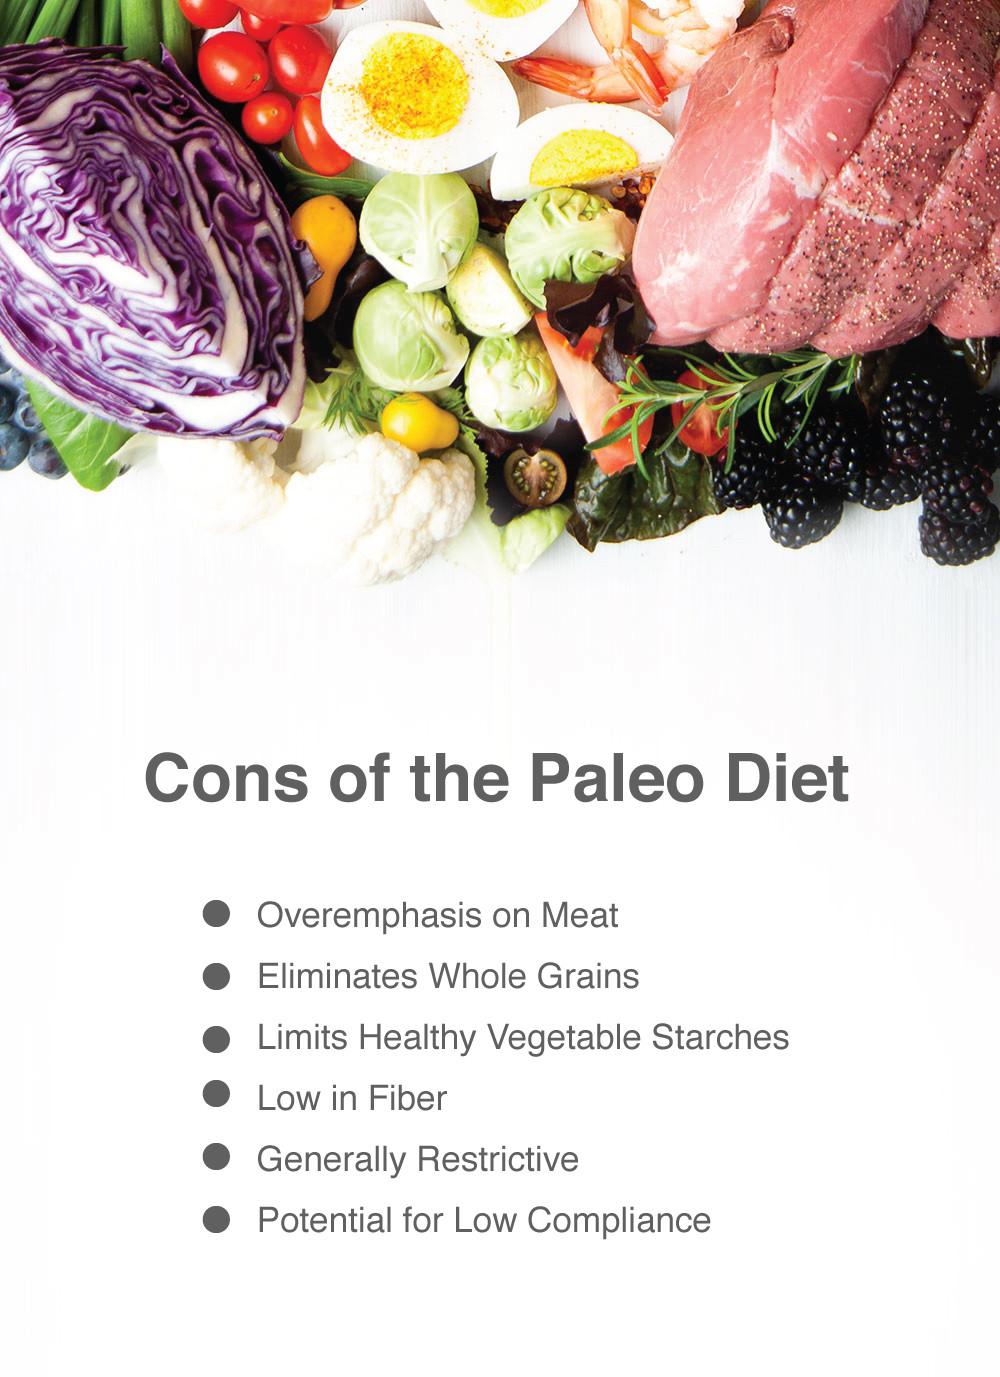 Paleo Diet Cons
 The Paleo Diet Pros and Cons